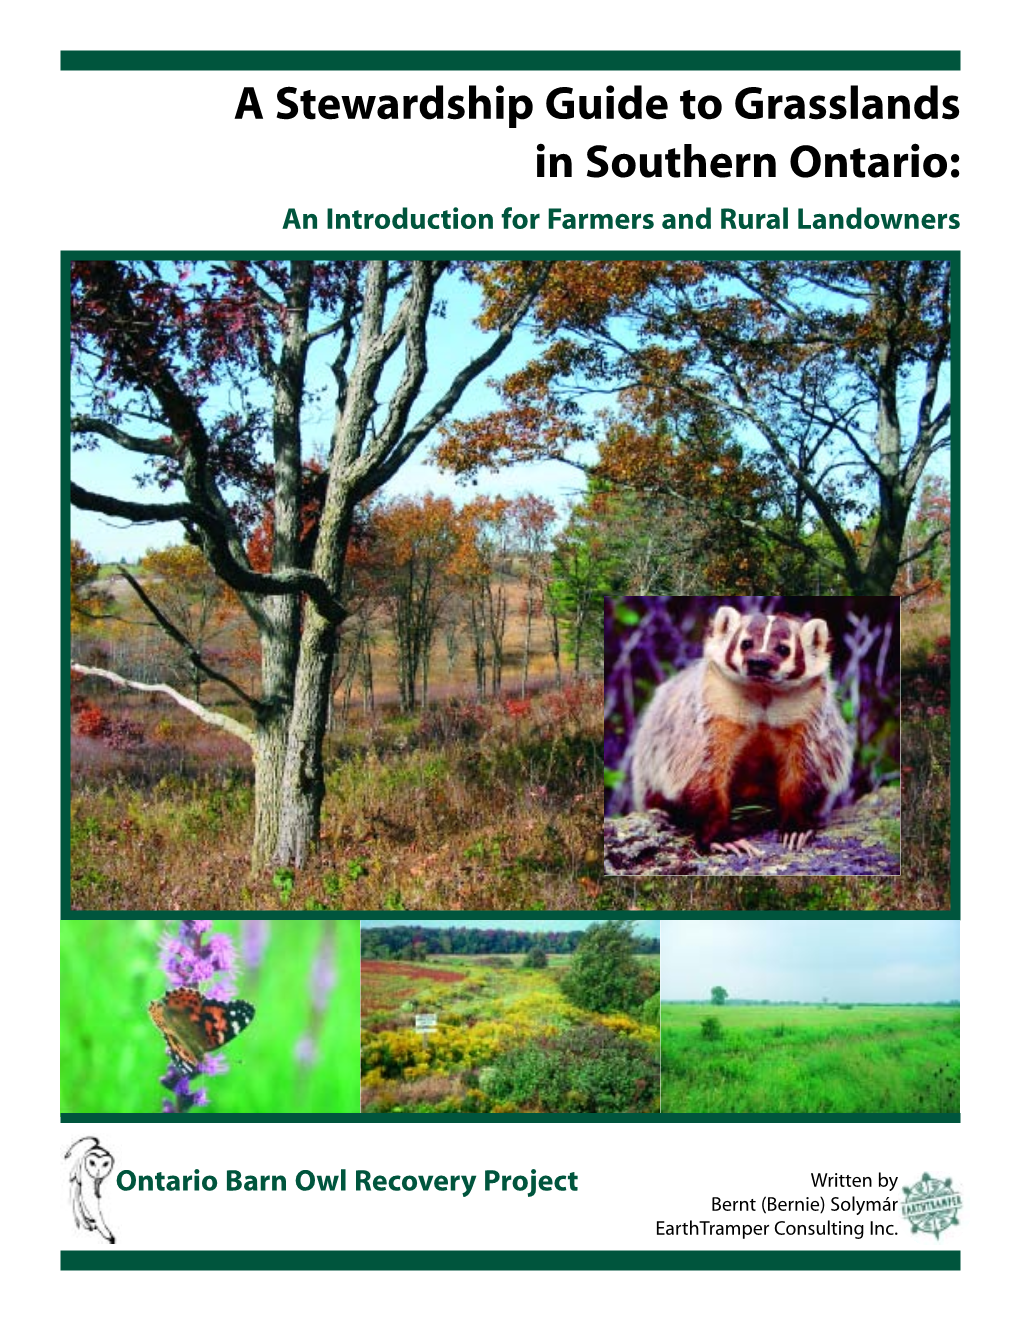 A Stewardship Guide to Grasslands in Southern Ontario: an Introduction for Farmers and Rural Landowners